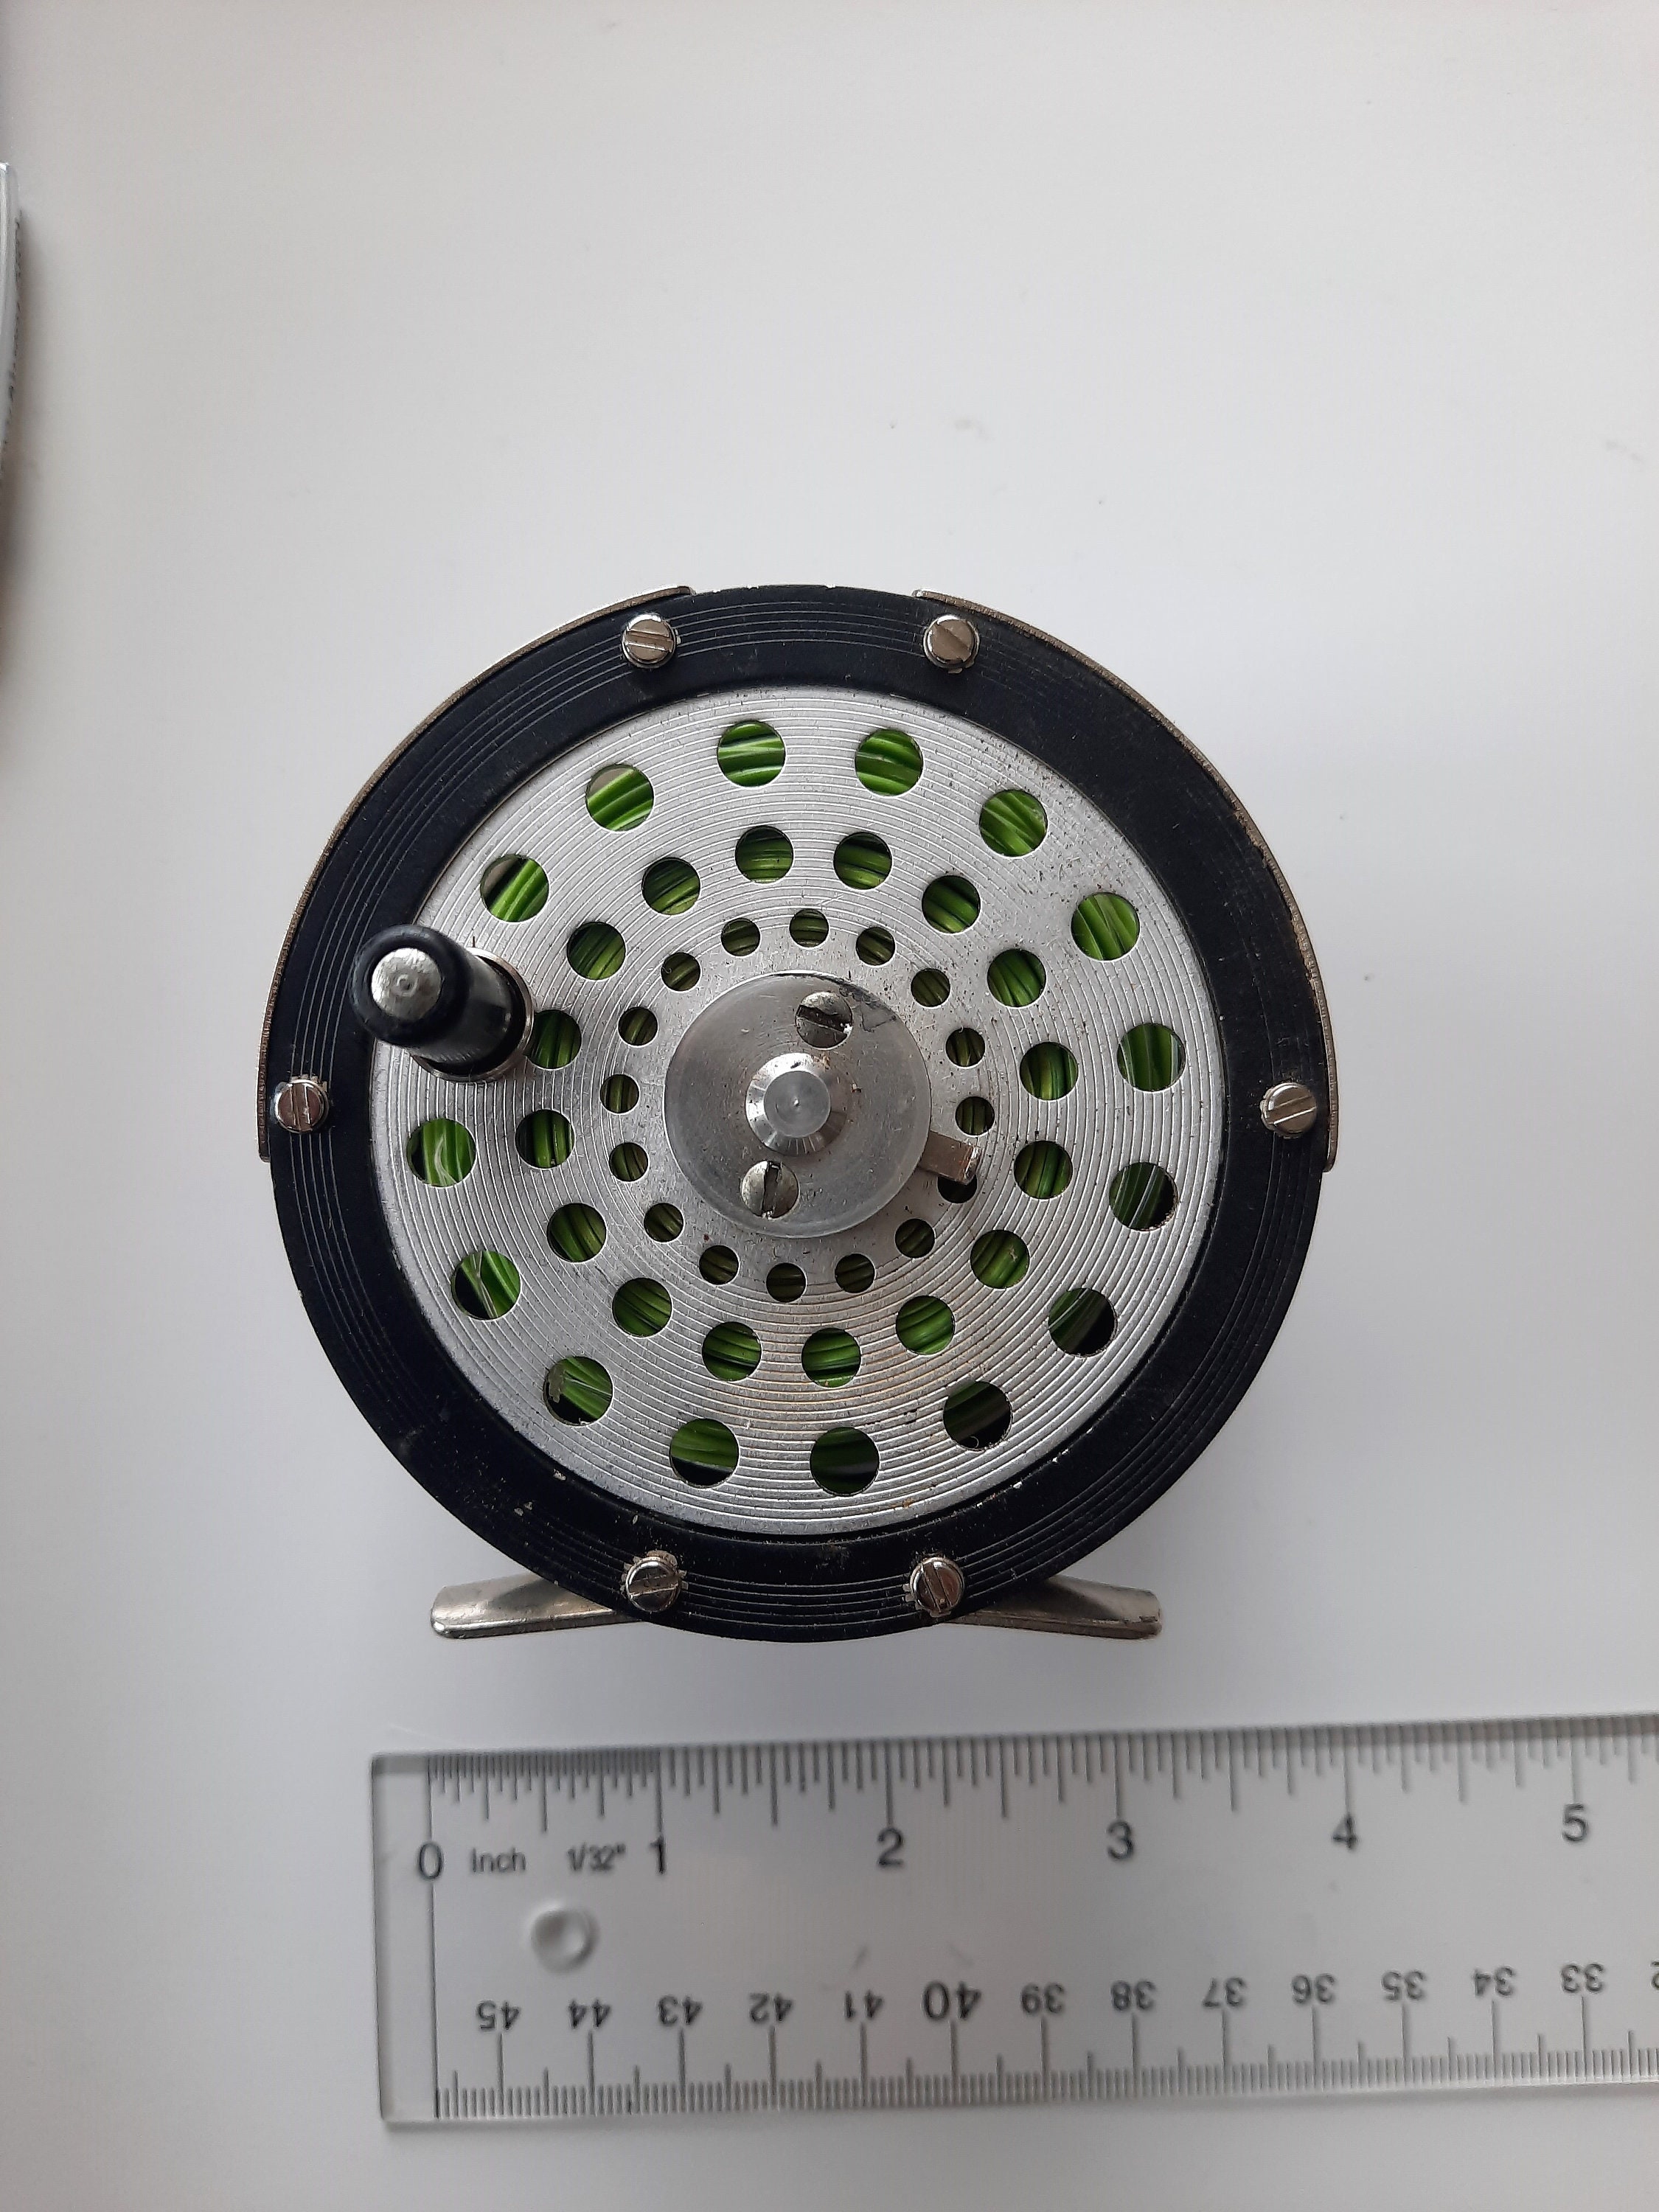 South Bend Fly Reel 